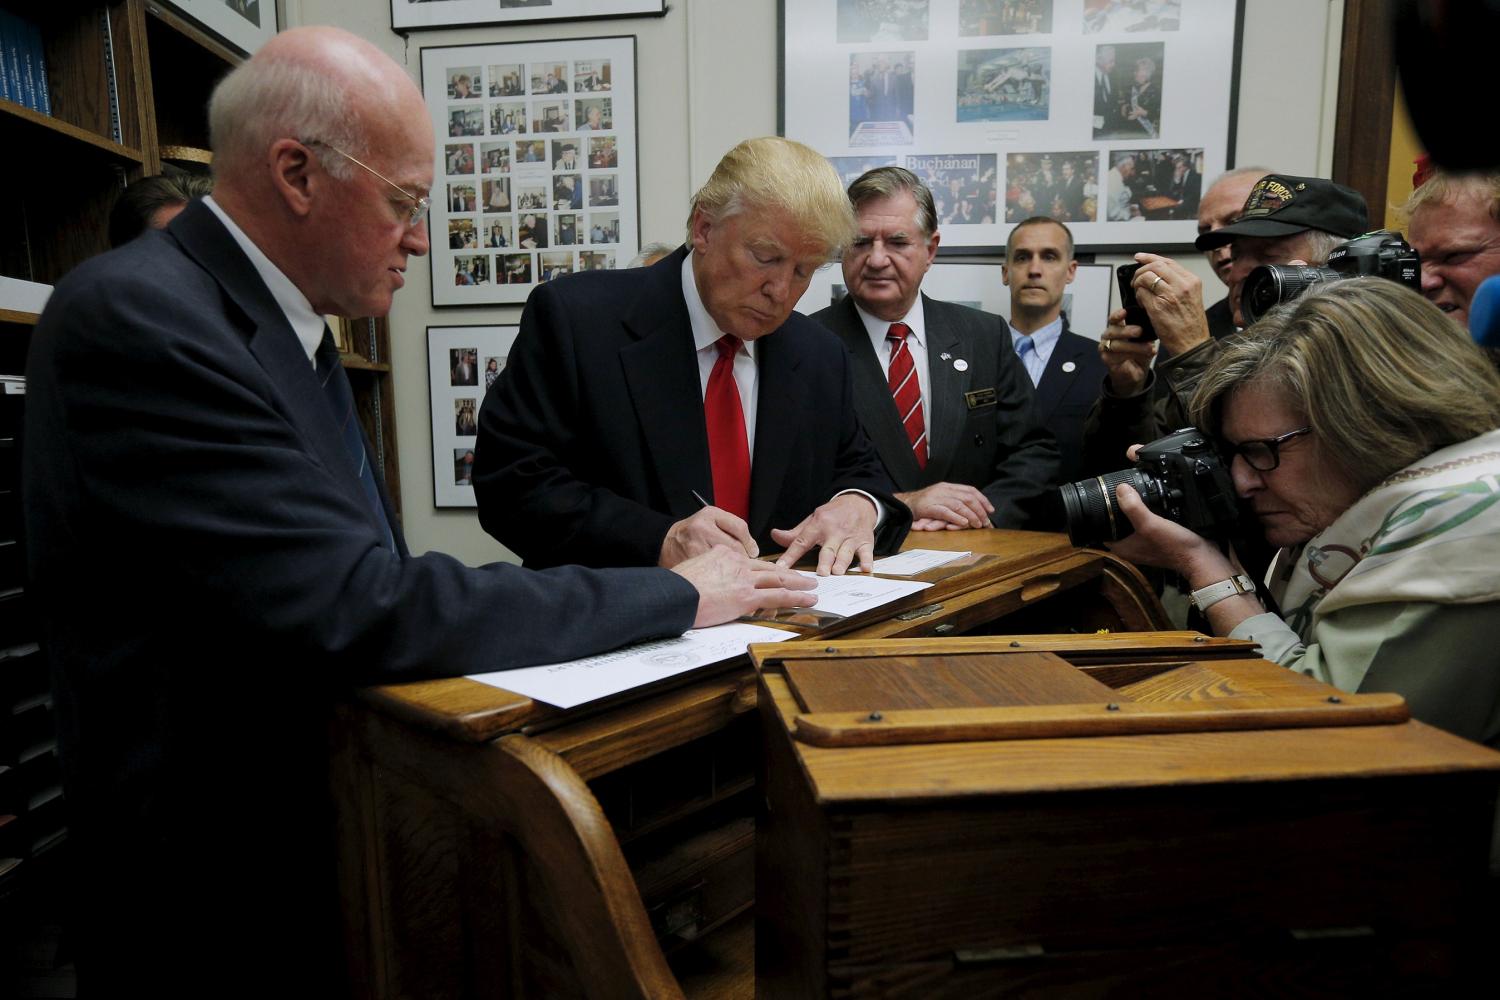 New Hampshire Secretary of State William Gardner (L) watches as U.S. Republican presidential candidate Trump signs his declaration of candidacy to appear on the New Hampshire primary ballot in Concord, New Hampshire, November 4, 2015. REUTERS/Brian Snyder - RTX1UQWO